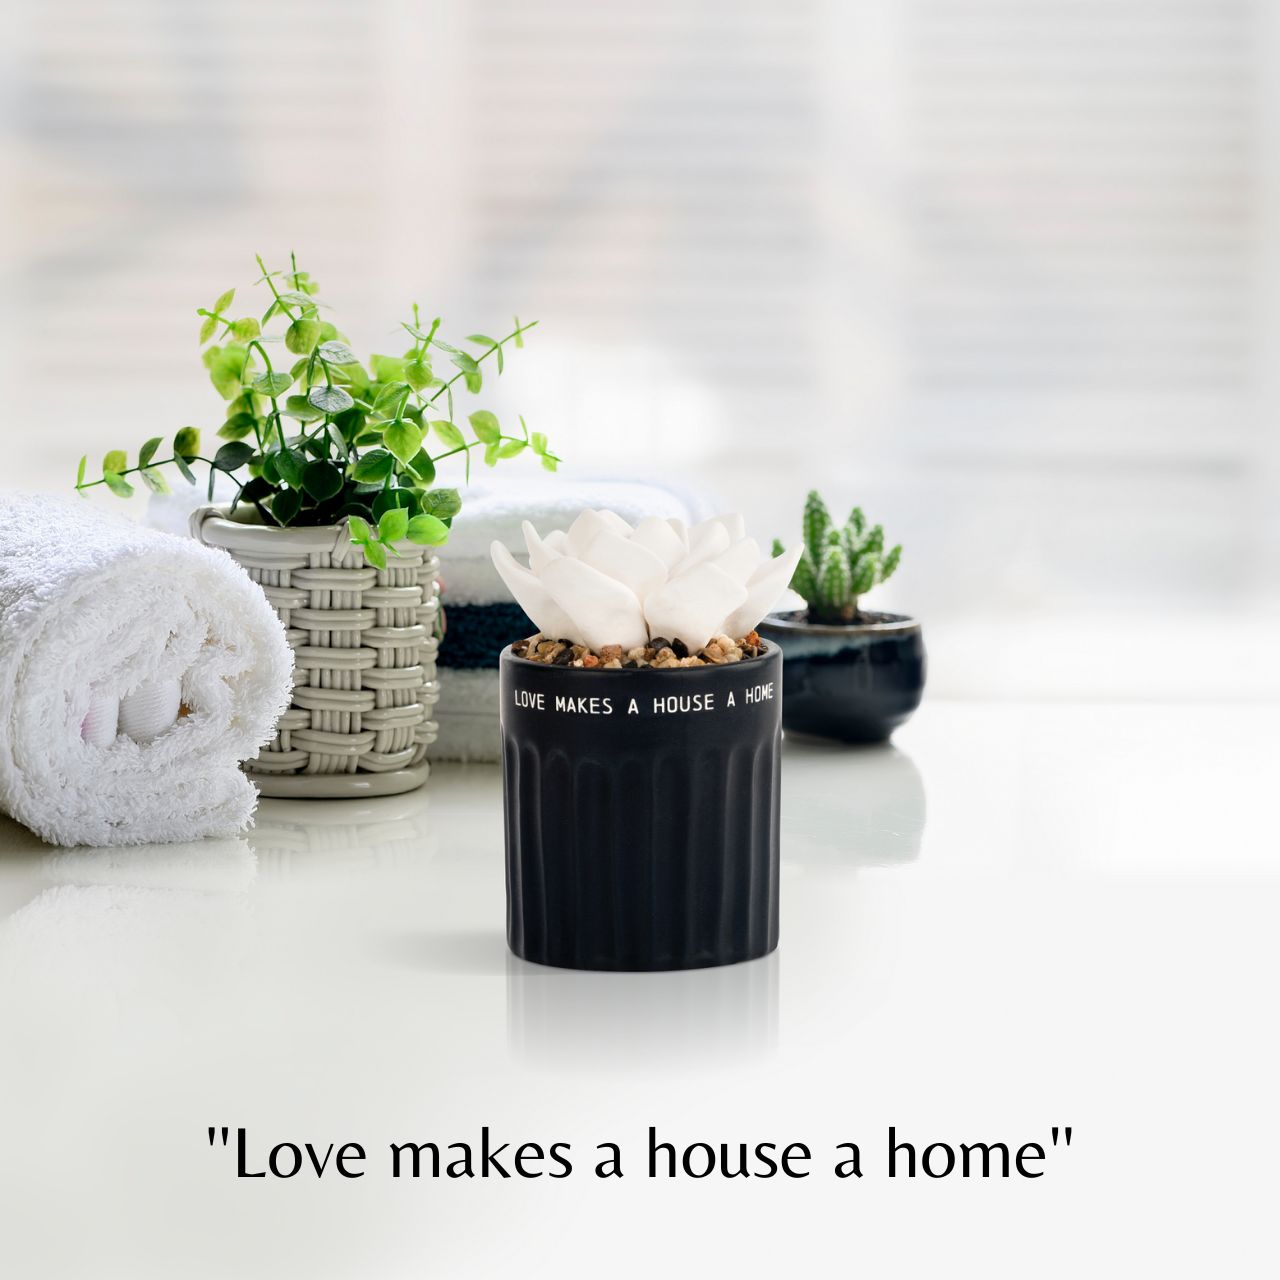 Succulent Oil Diffuser - Home by Demdaco  ''Love makes a house a home''  Our individually crafted succulent ceramic pots give the ability to create a quiet, peaceful aroma anywhere. Place a few drops of your favourite scented oil into the white sculpted succulent top for slow, relaxing oil diffusion. ''Love makes a house a home'' will make anyone feel calm.